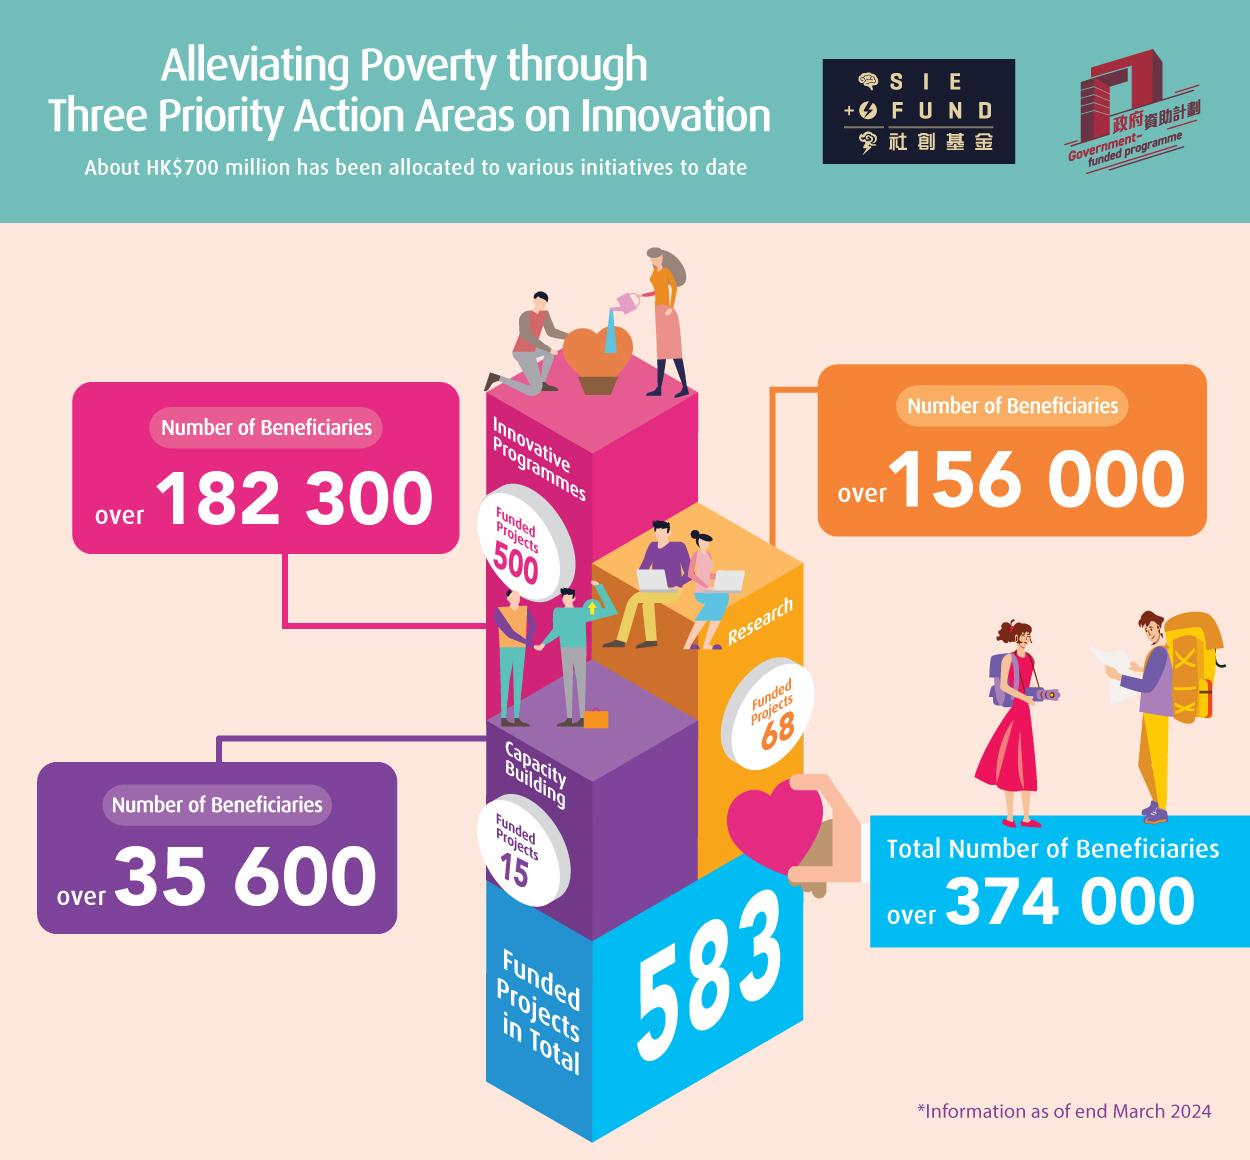 The SIE Fund seeks to alleviate poverty through three priority action areas on innovation.  About HK$700 million has been allocated to various initiatives as of March 2024.  The number of funded projects in total is 583 and the total number of beneficiaries is over 374000.  Under Innovative Programmes, the number of funded projects is 500 and the number of beneficiaries is over 182300.  Under Capacity Building, the number of funded projects is 15 and the number of beneficiaries is over 35600.  Under Research, the number of funded projects is 68 and the number of beneficiaries is over 156000.